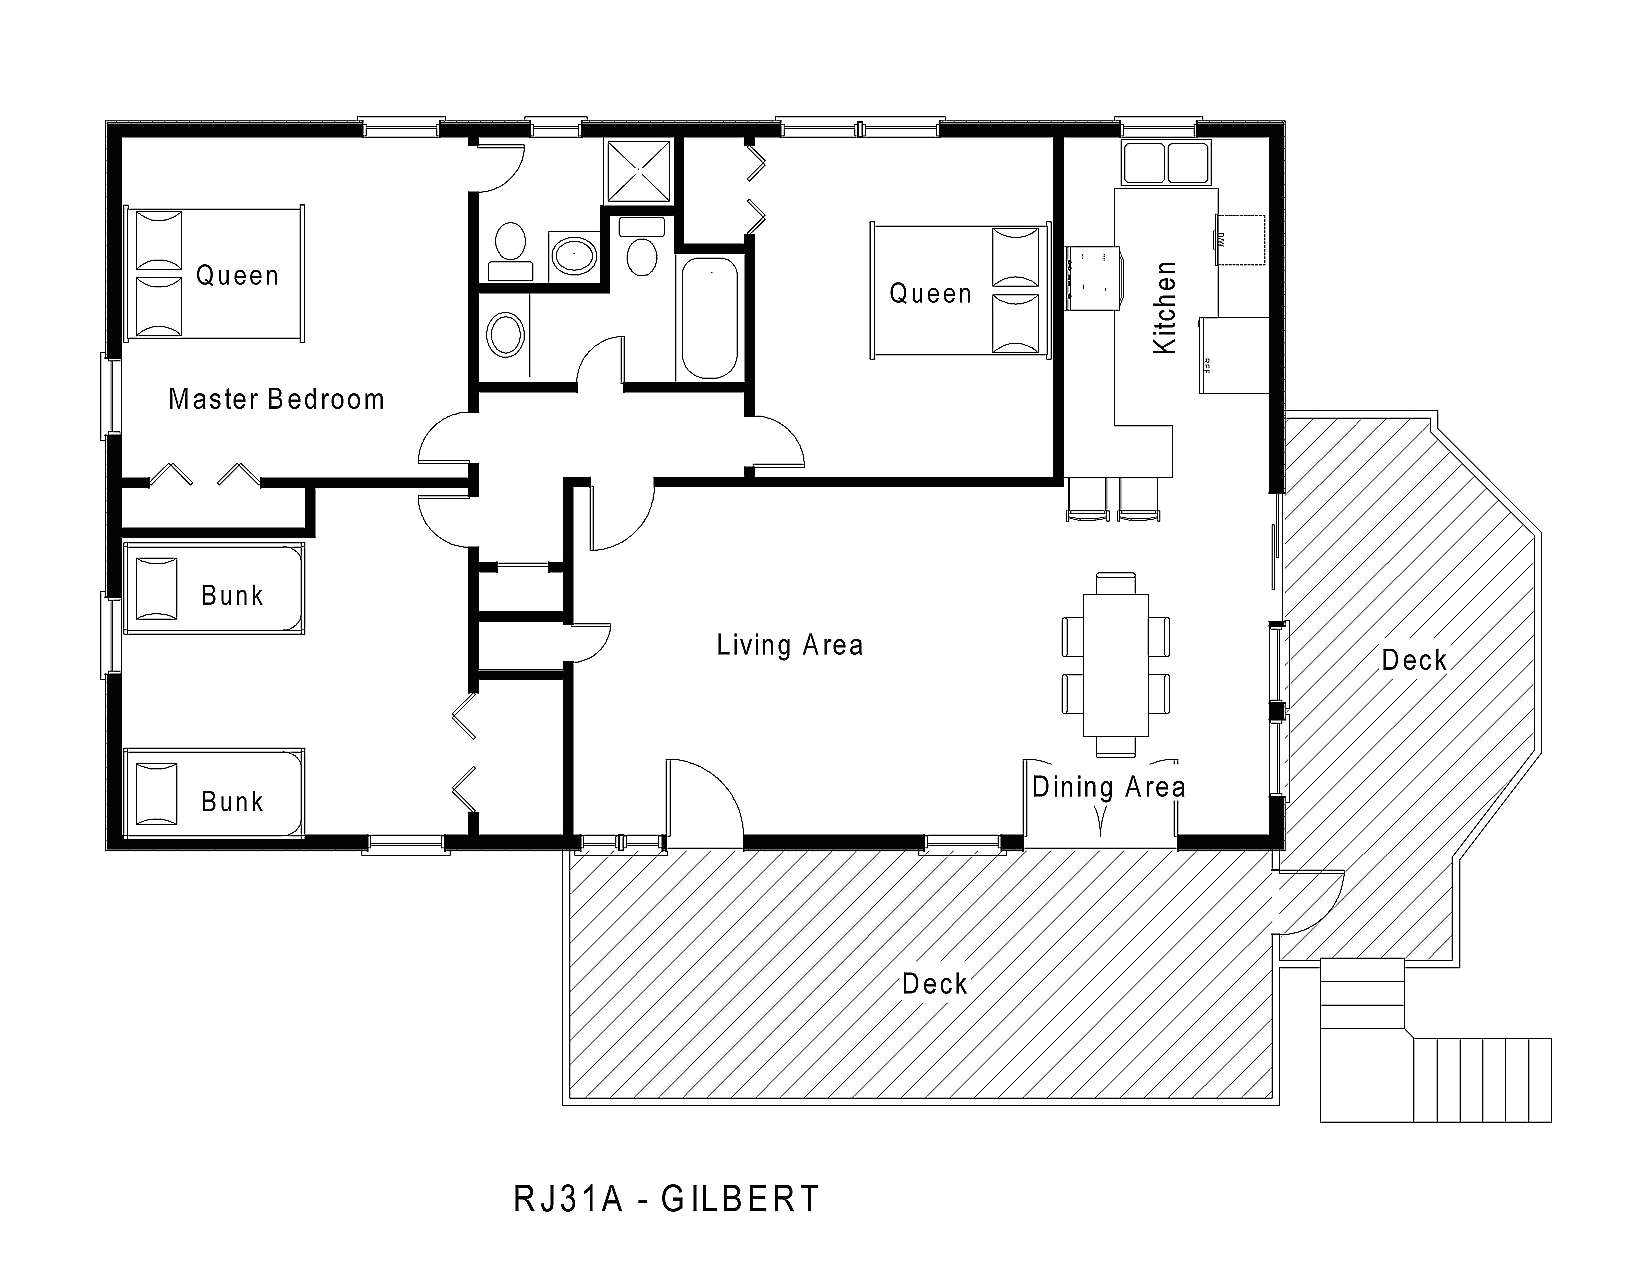 Floor Plans for One Level Homes 1 Story Beach House Floor Plans Home Deco Plans